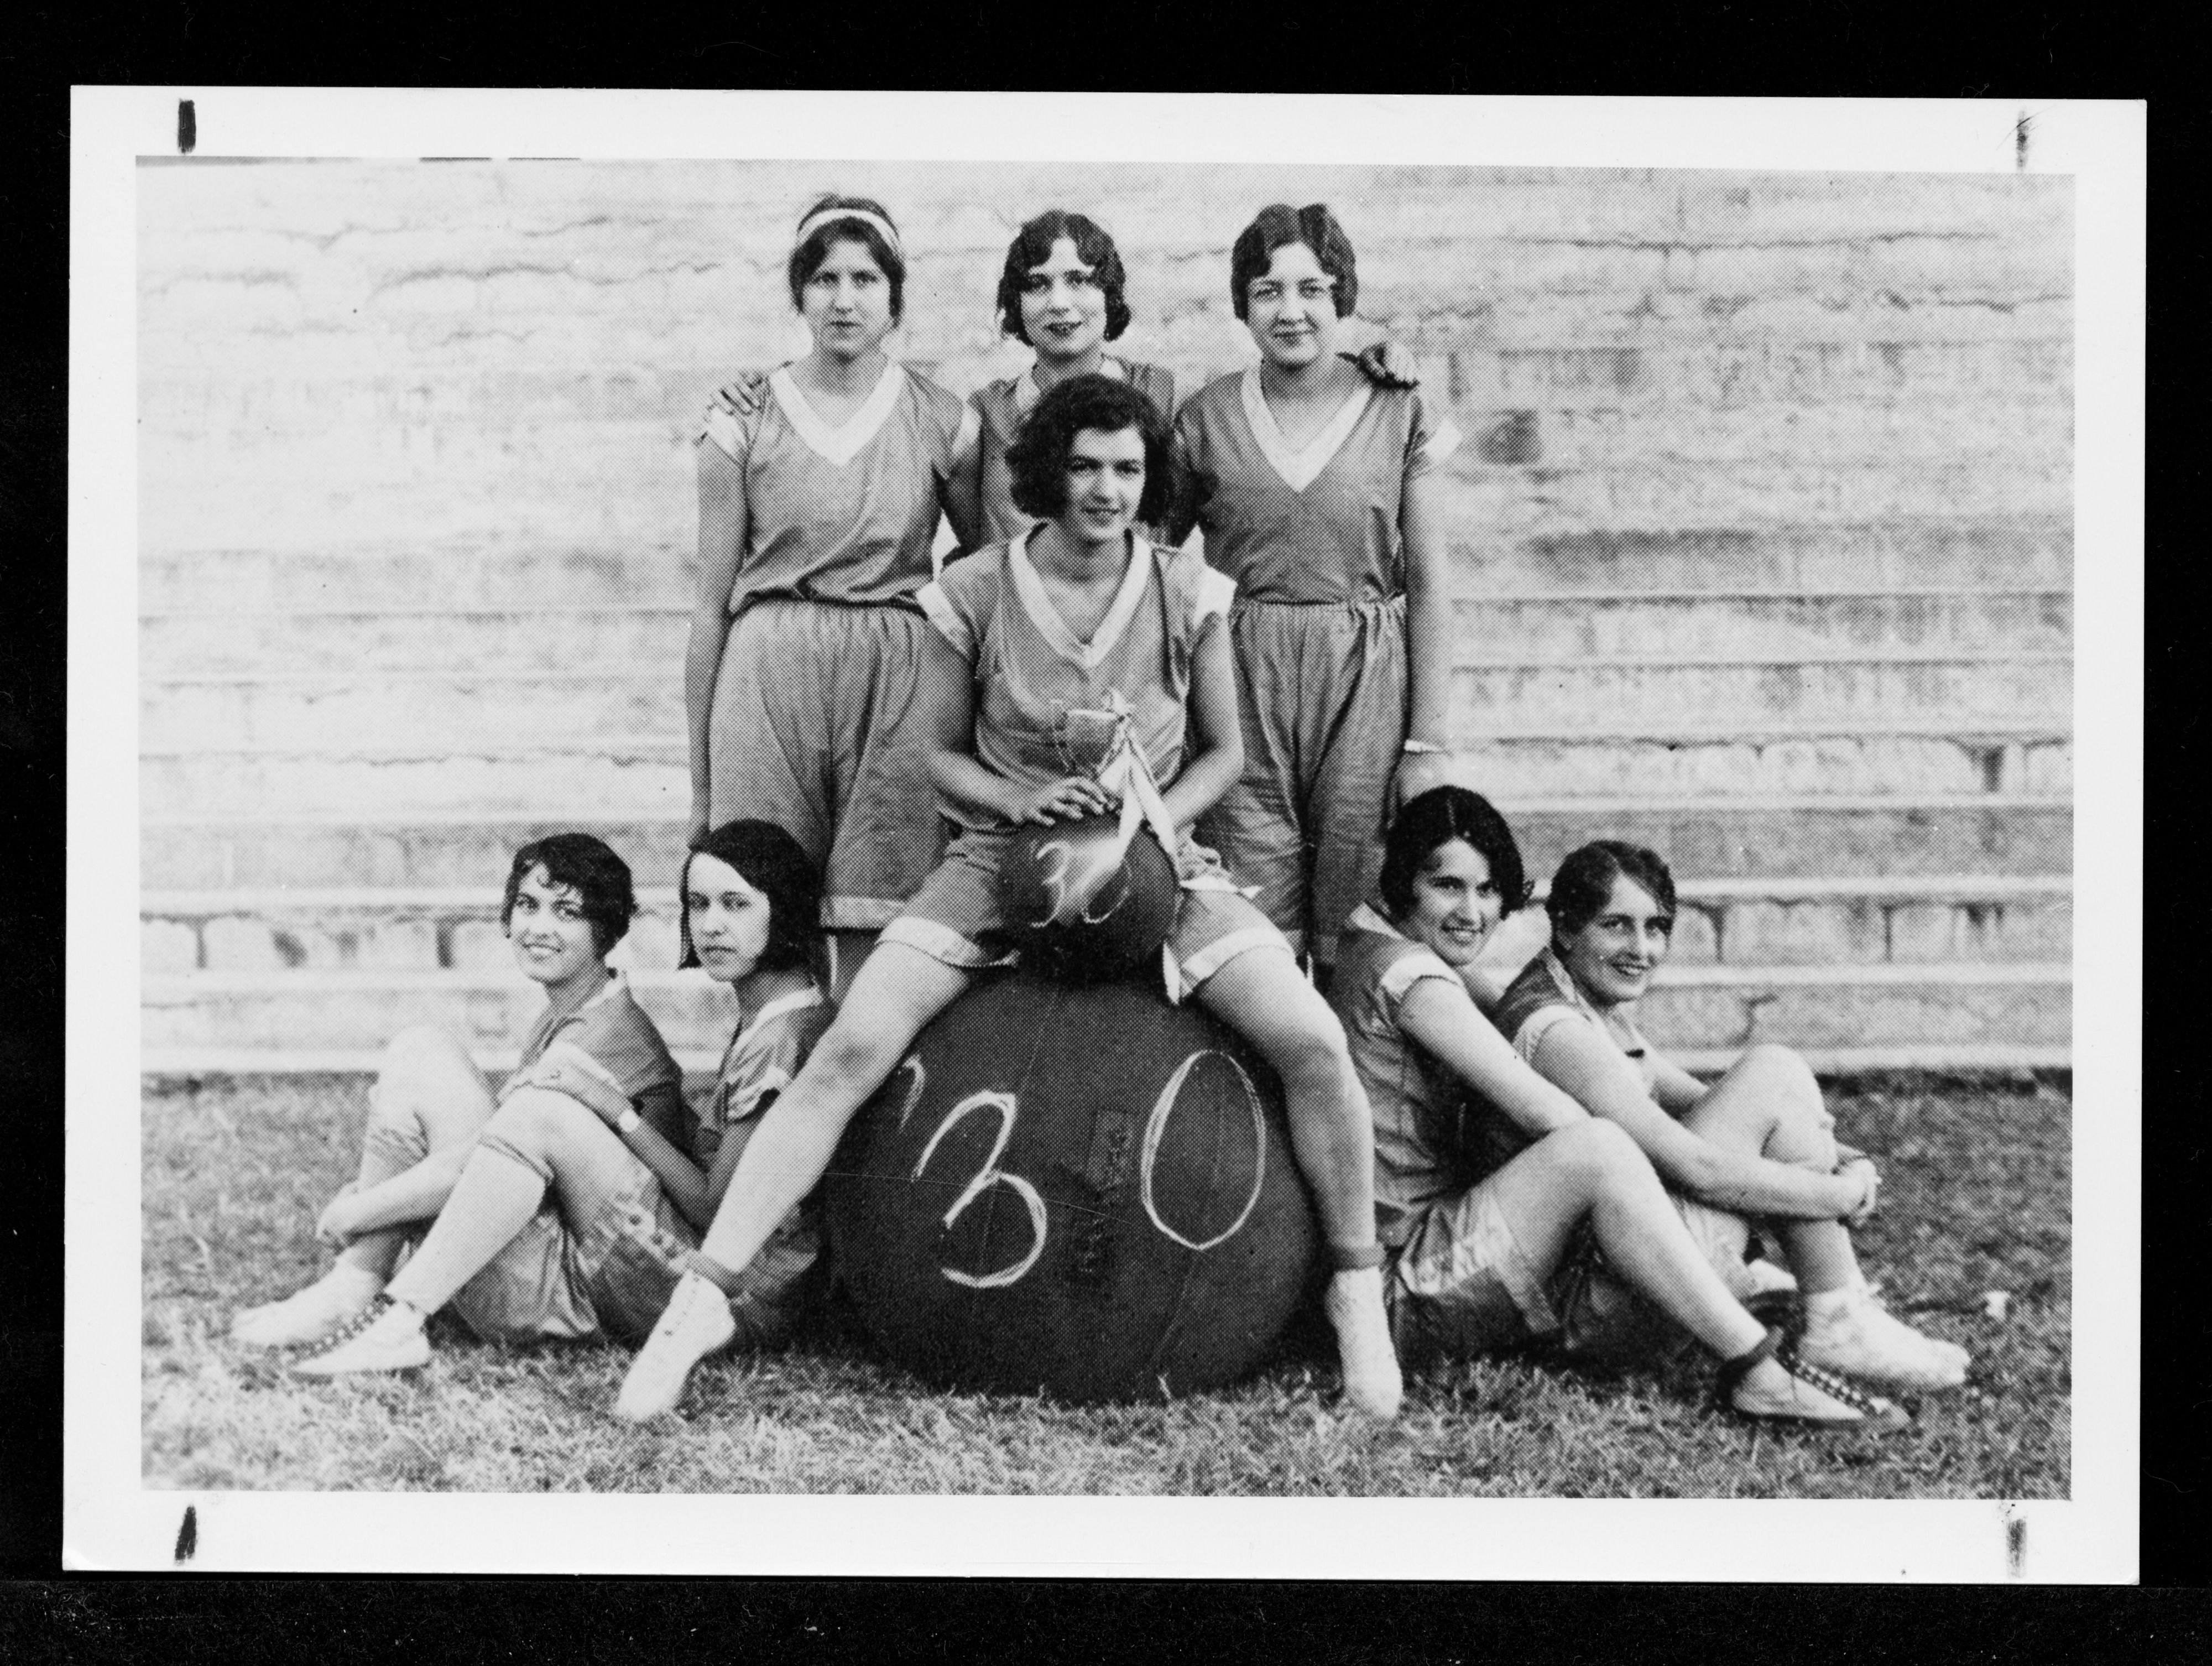 Women sitting on and around a large ball with the number 30 on it.